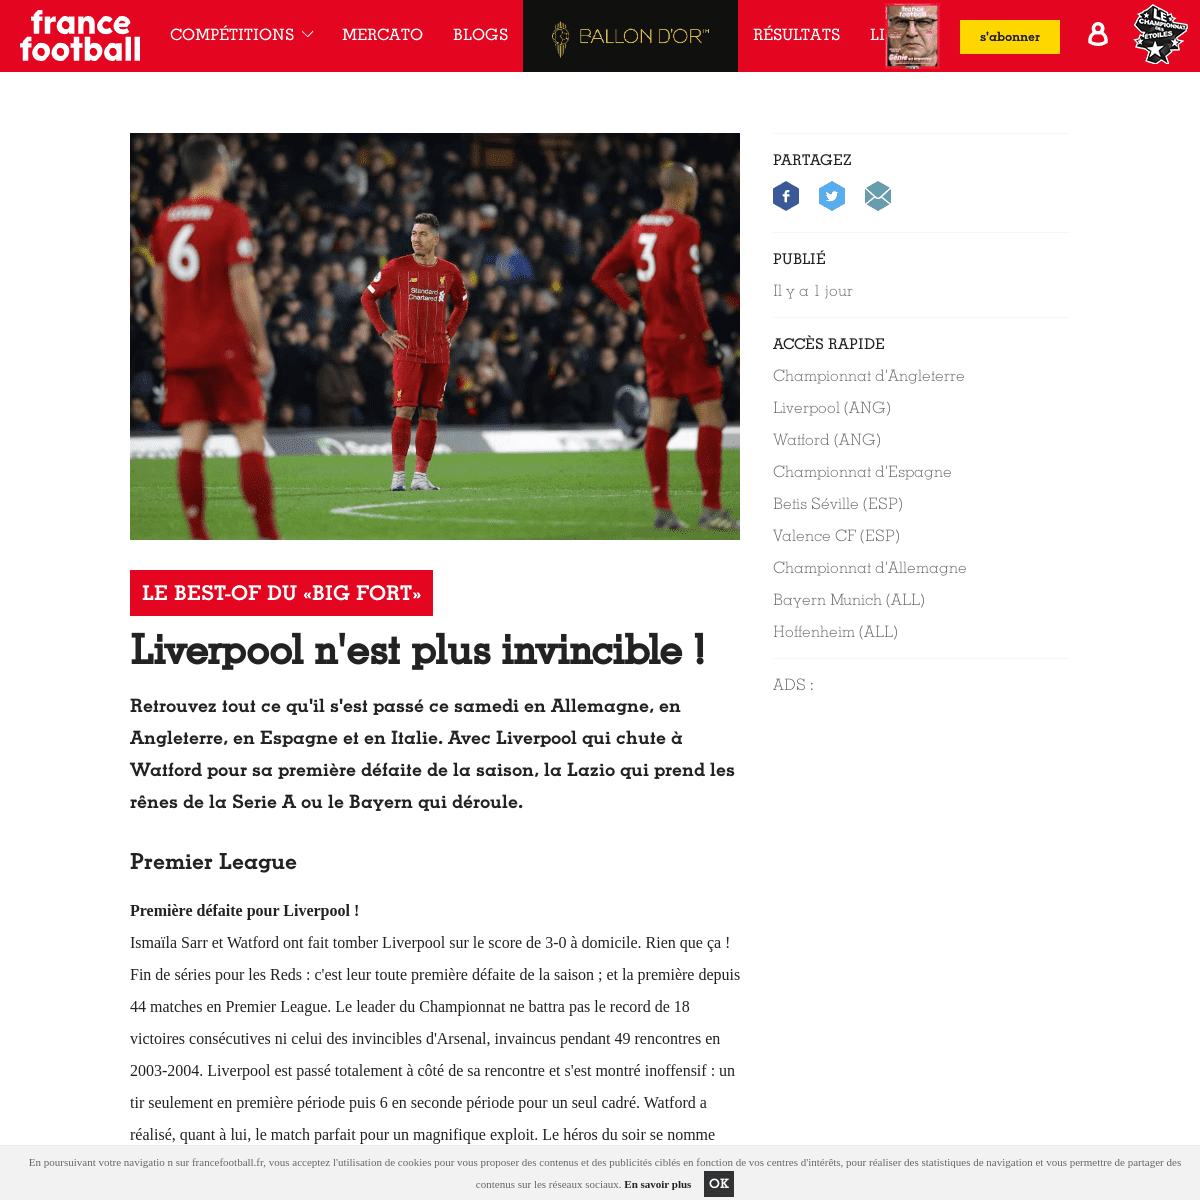 A complete backup of www.francefootball.fr/news/Liverpool-n-est-plus-invincible/1114692